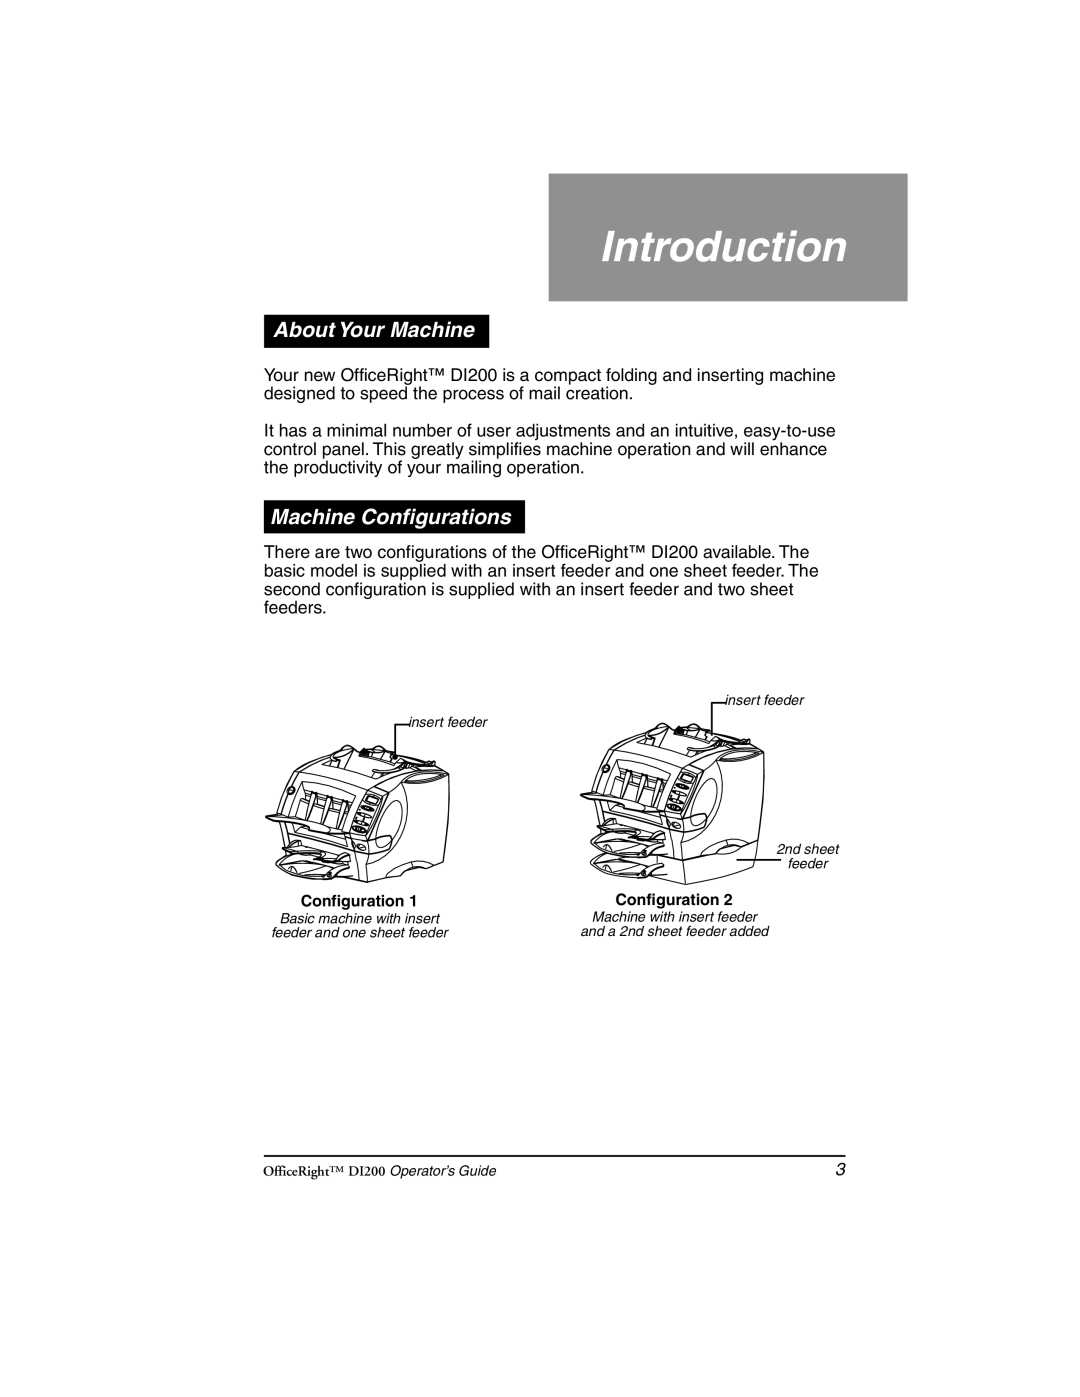 Pitney Bowes DI200 manual Introduction, About Your Machine, Machine Configurations 